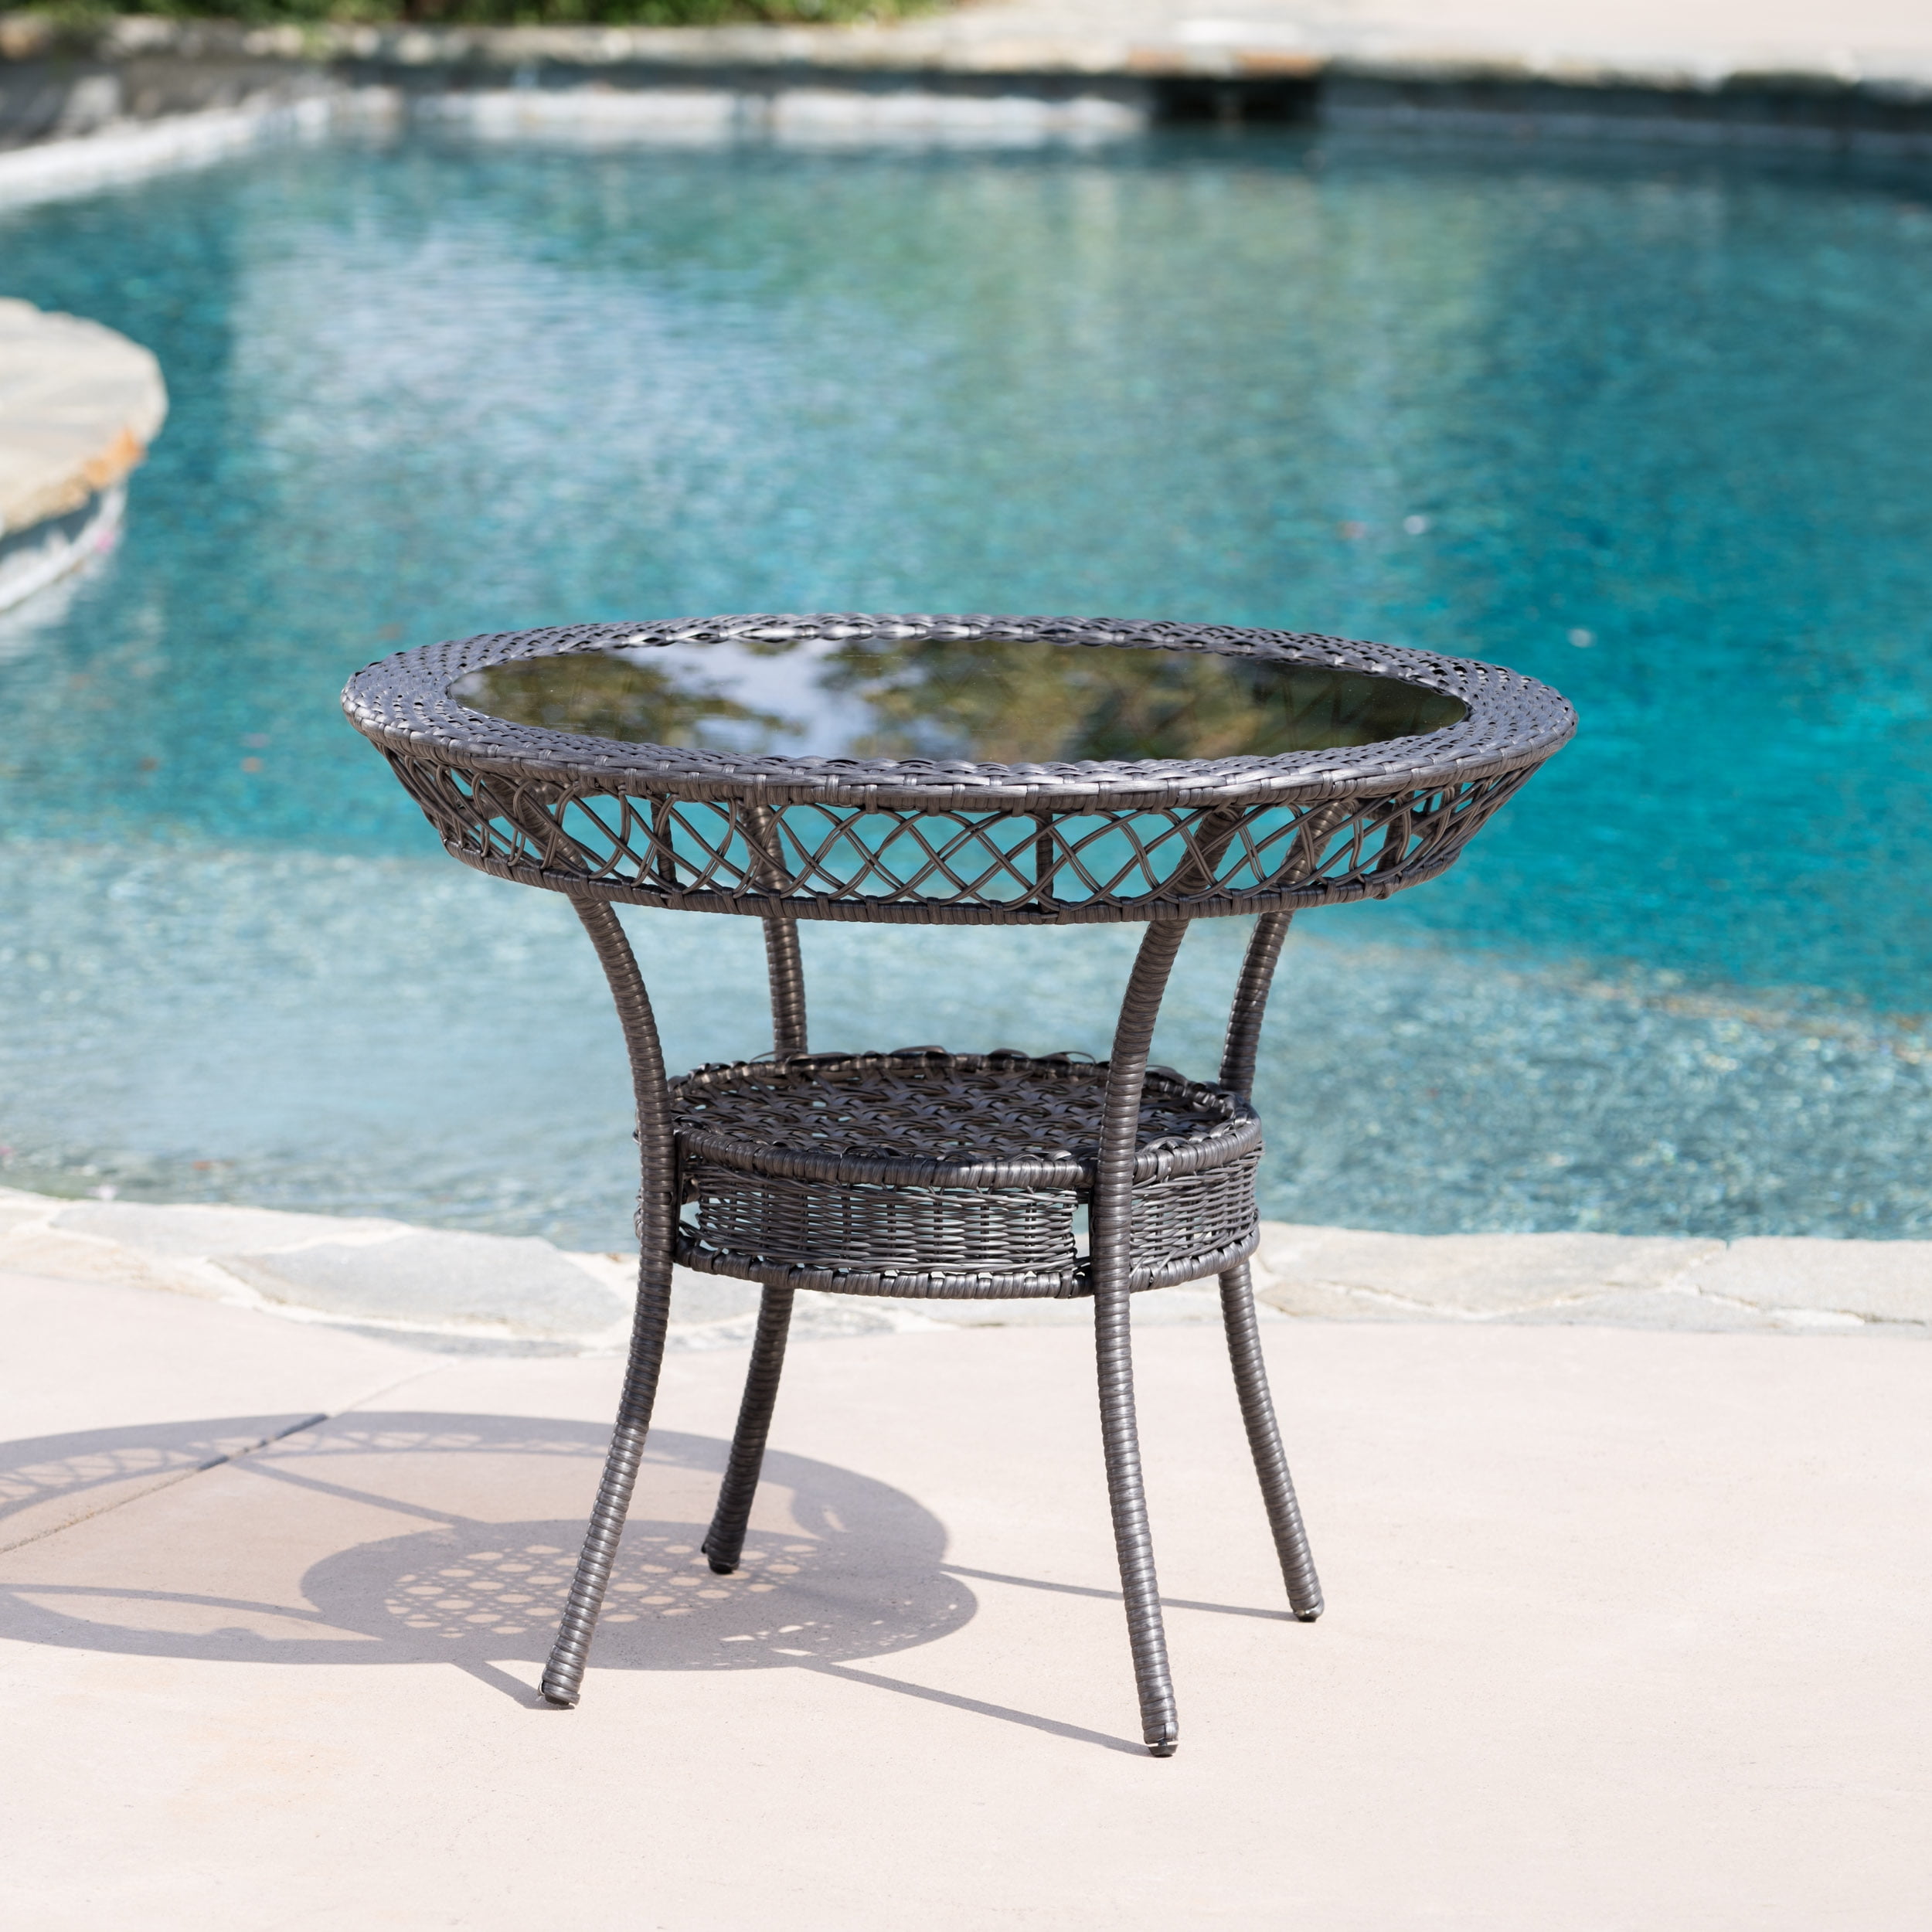 widower Cook blue whale Figaro Outdoor 34" Wicker Table with Tempered Glass Table Top, Grey -  Walmart.com